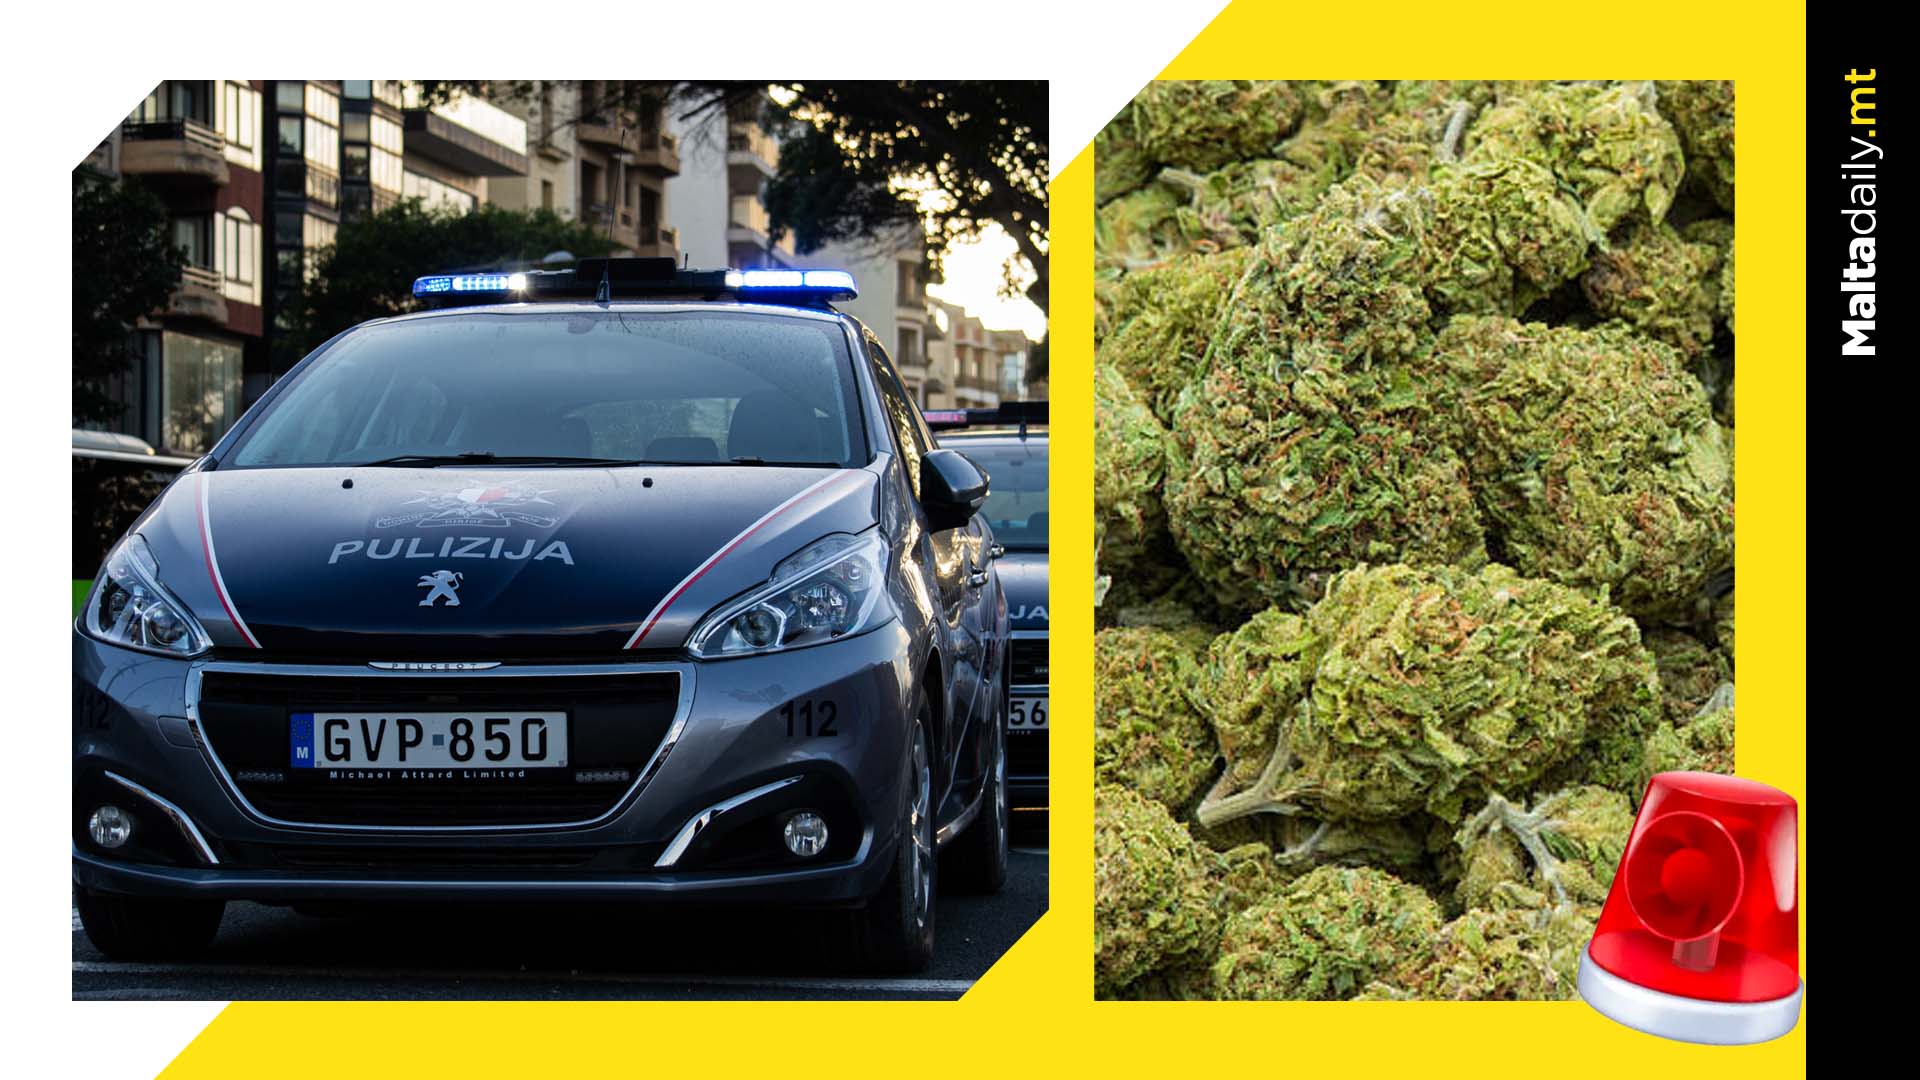 Police chase bailed out 27 year old to find 3 kilos of cannabis